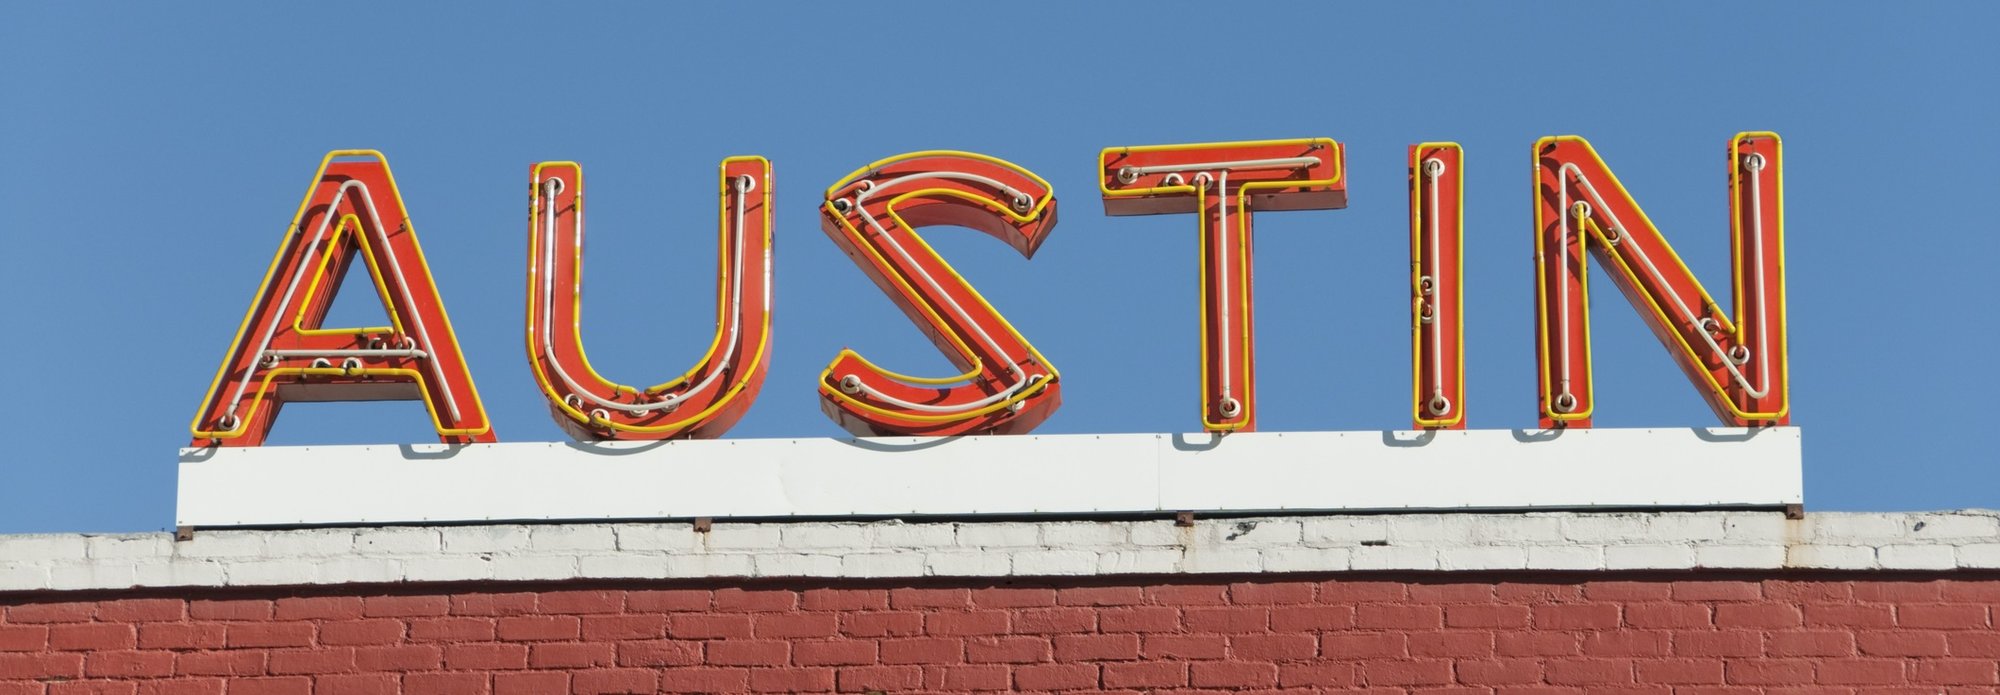 photo of a brick building with block neon letters on the roof that read: AUSTIN